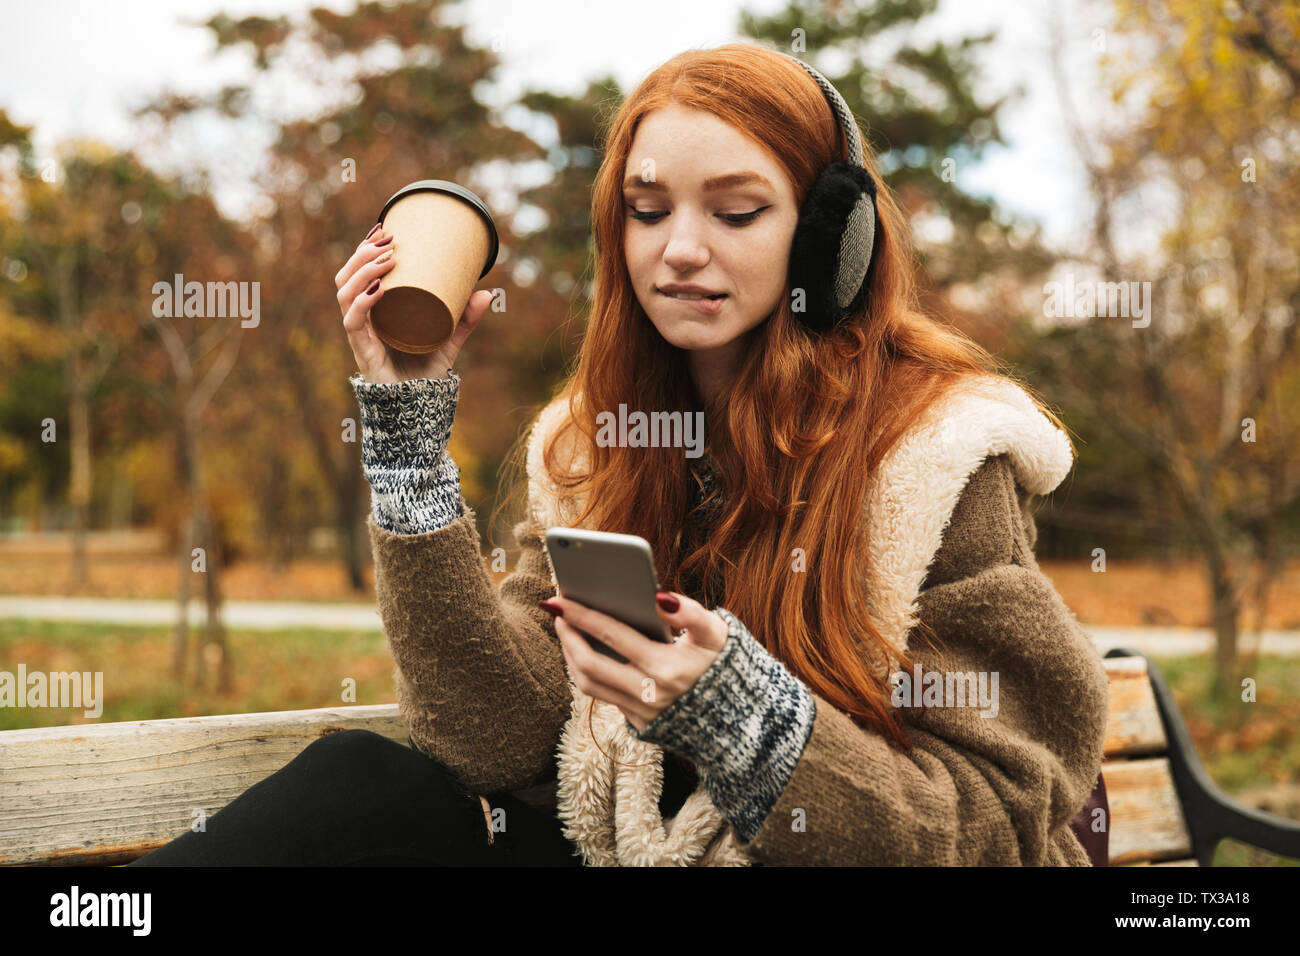 Lovely redheaded young girl listening to music with headphones while sitting on a bench, using mobile phone Stock Photo